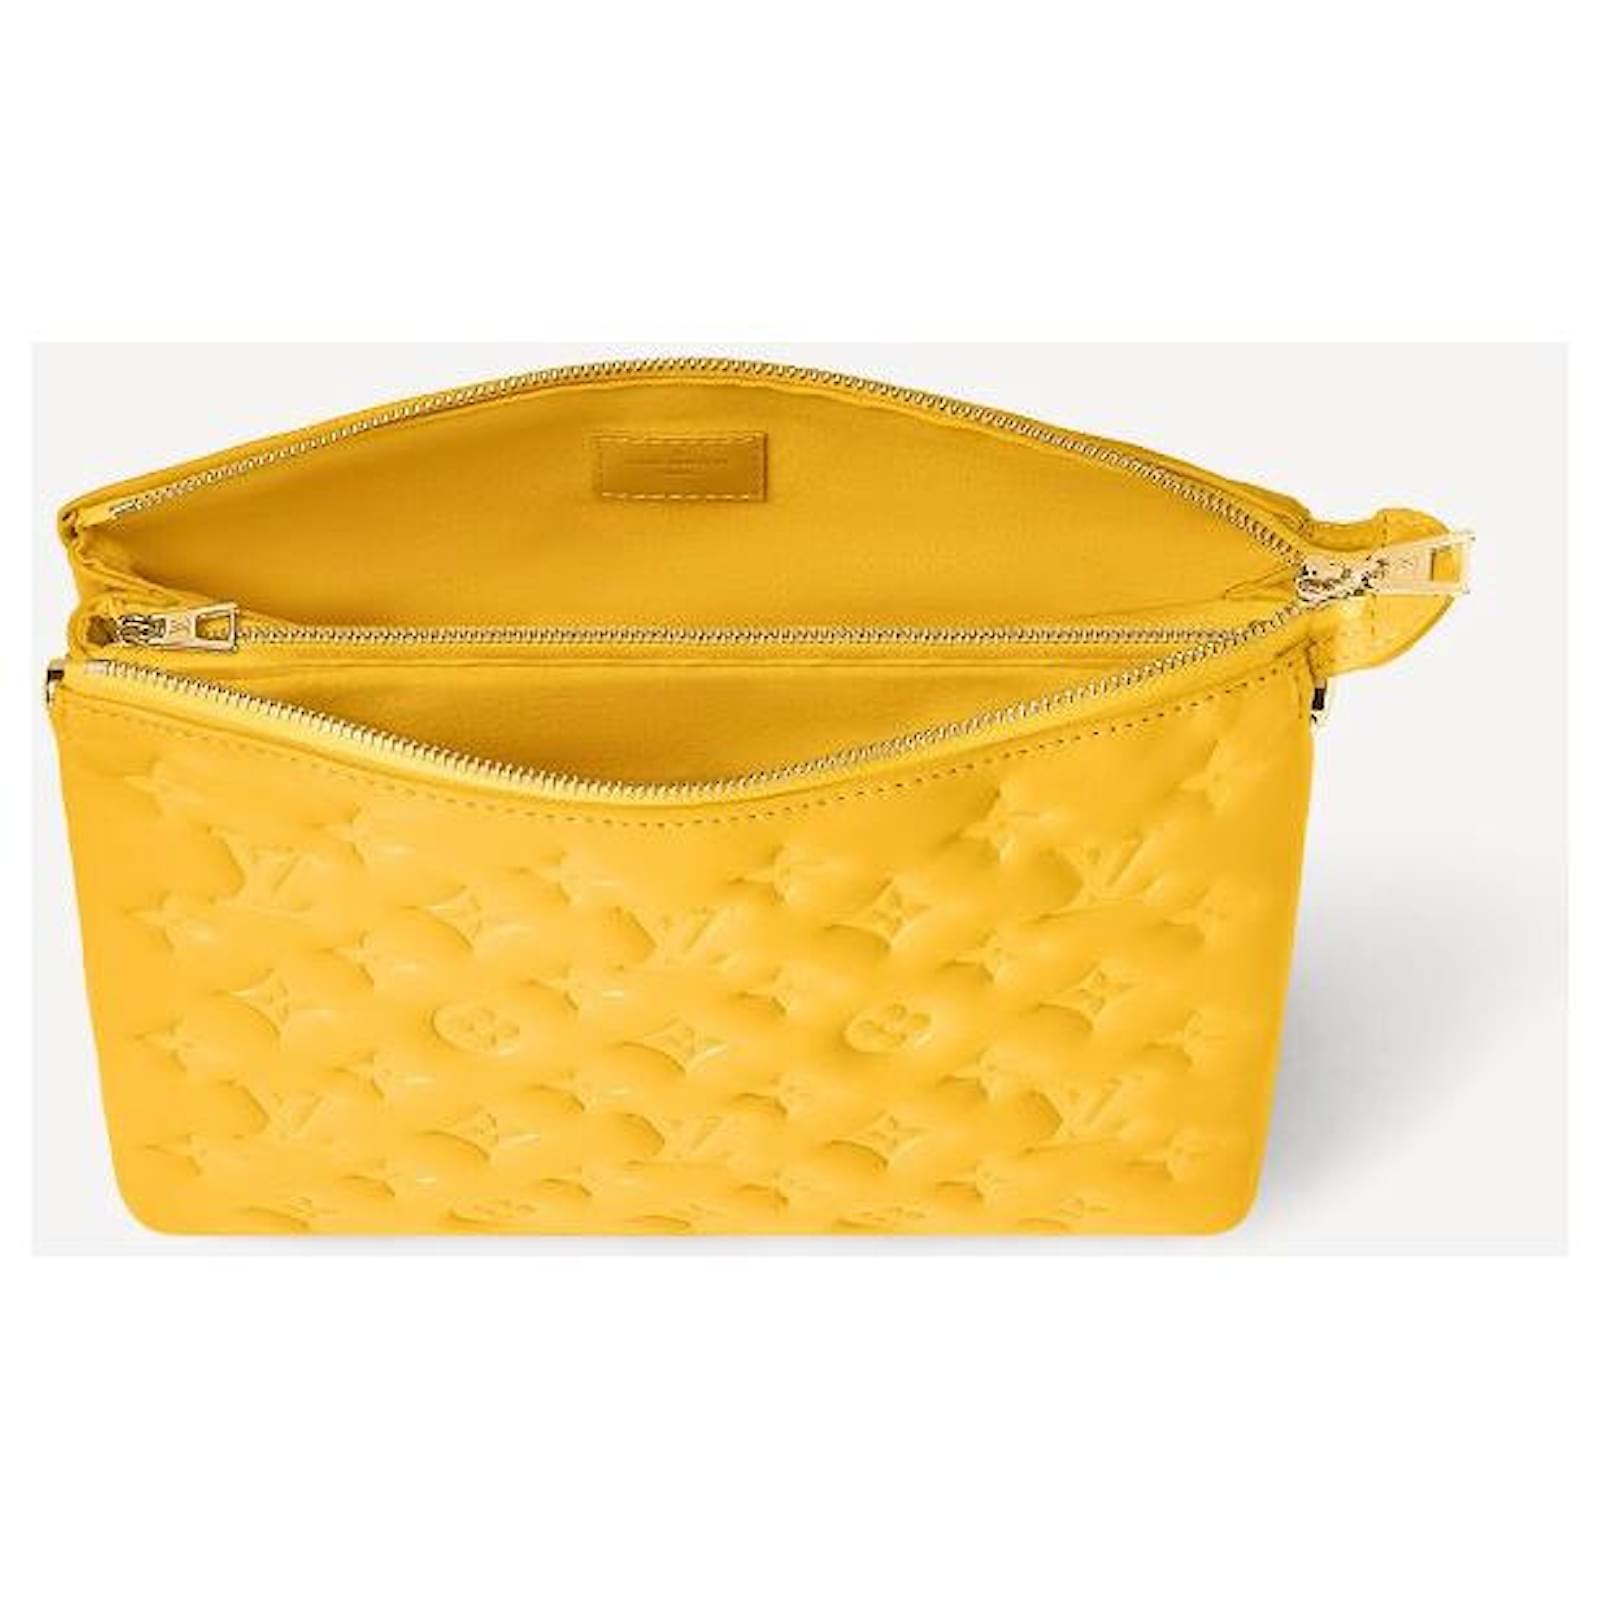 Louis Vuitton Coussin PM, Yellow, One Size